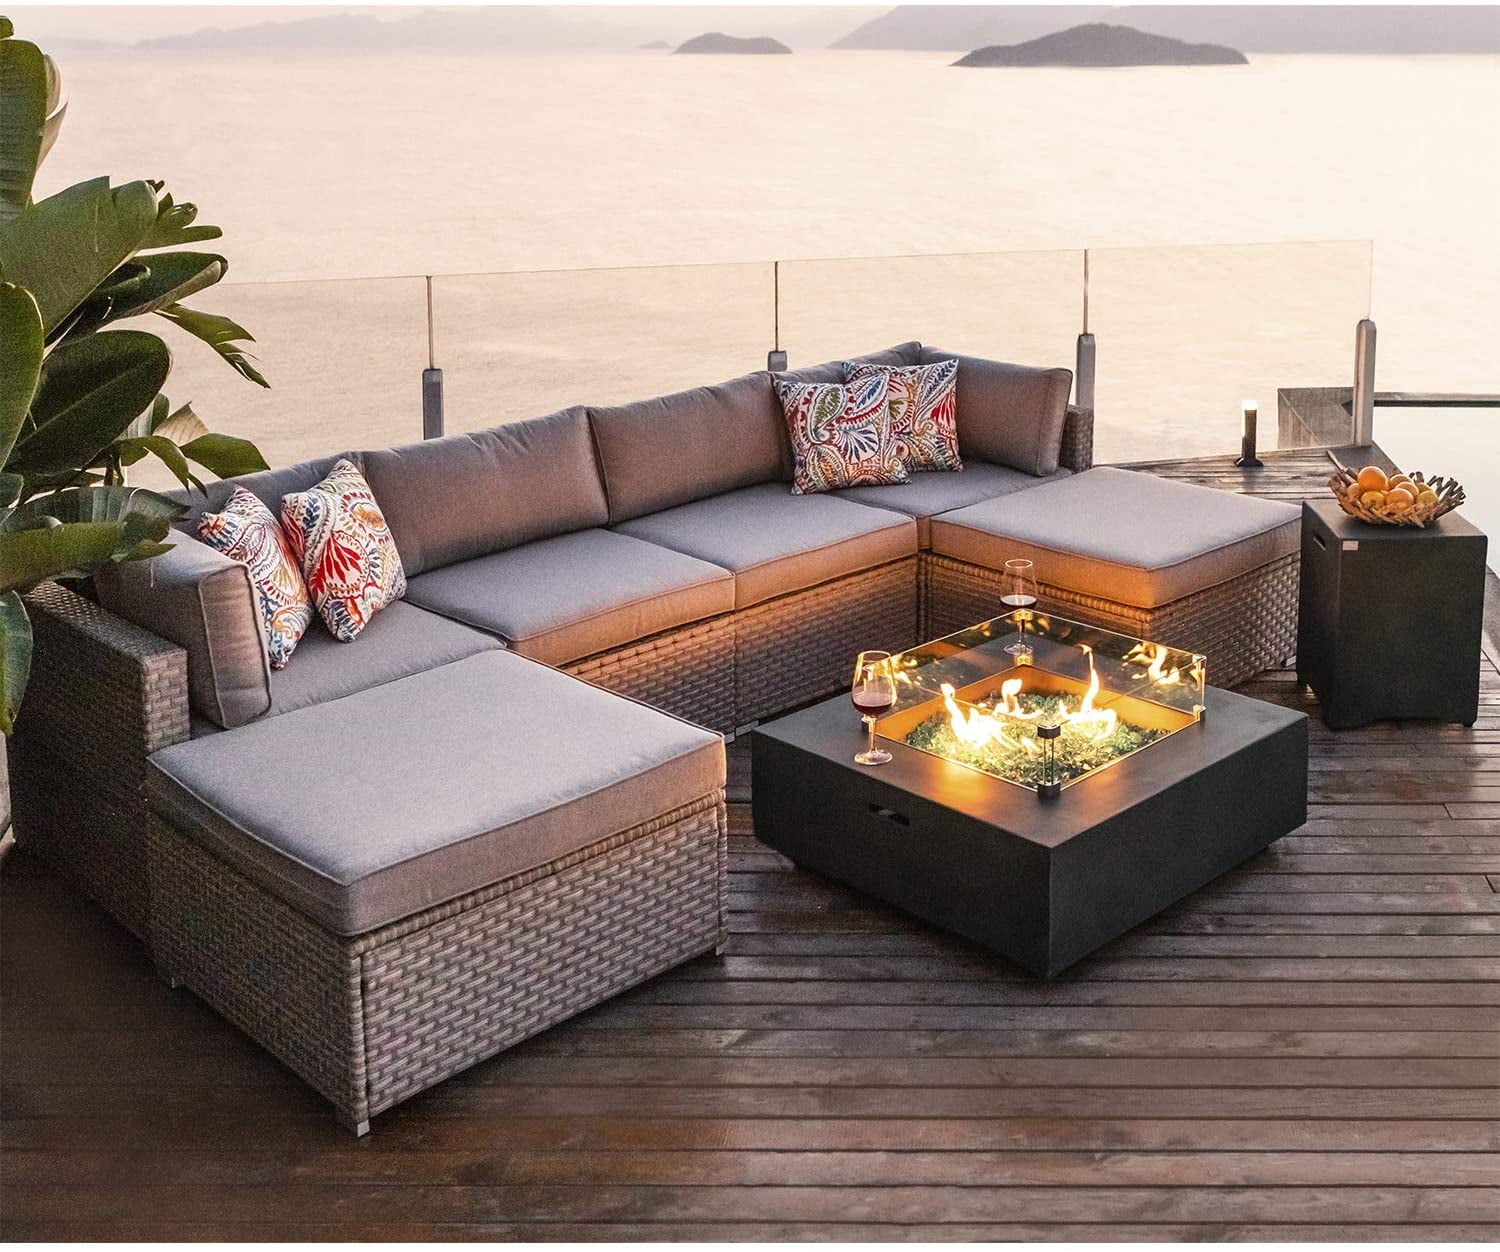 Cosiest 8 Piece Fire Pit Table Outdoor, Outdoor Furniture Set With Fire Pit Table